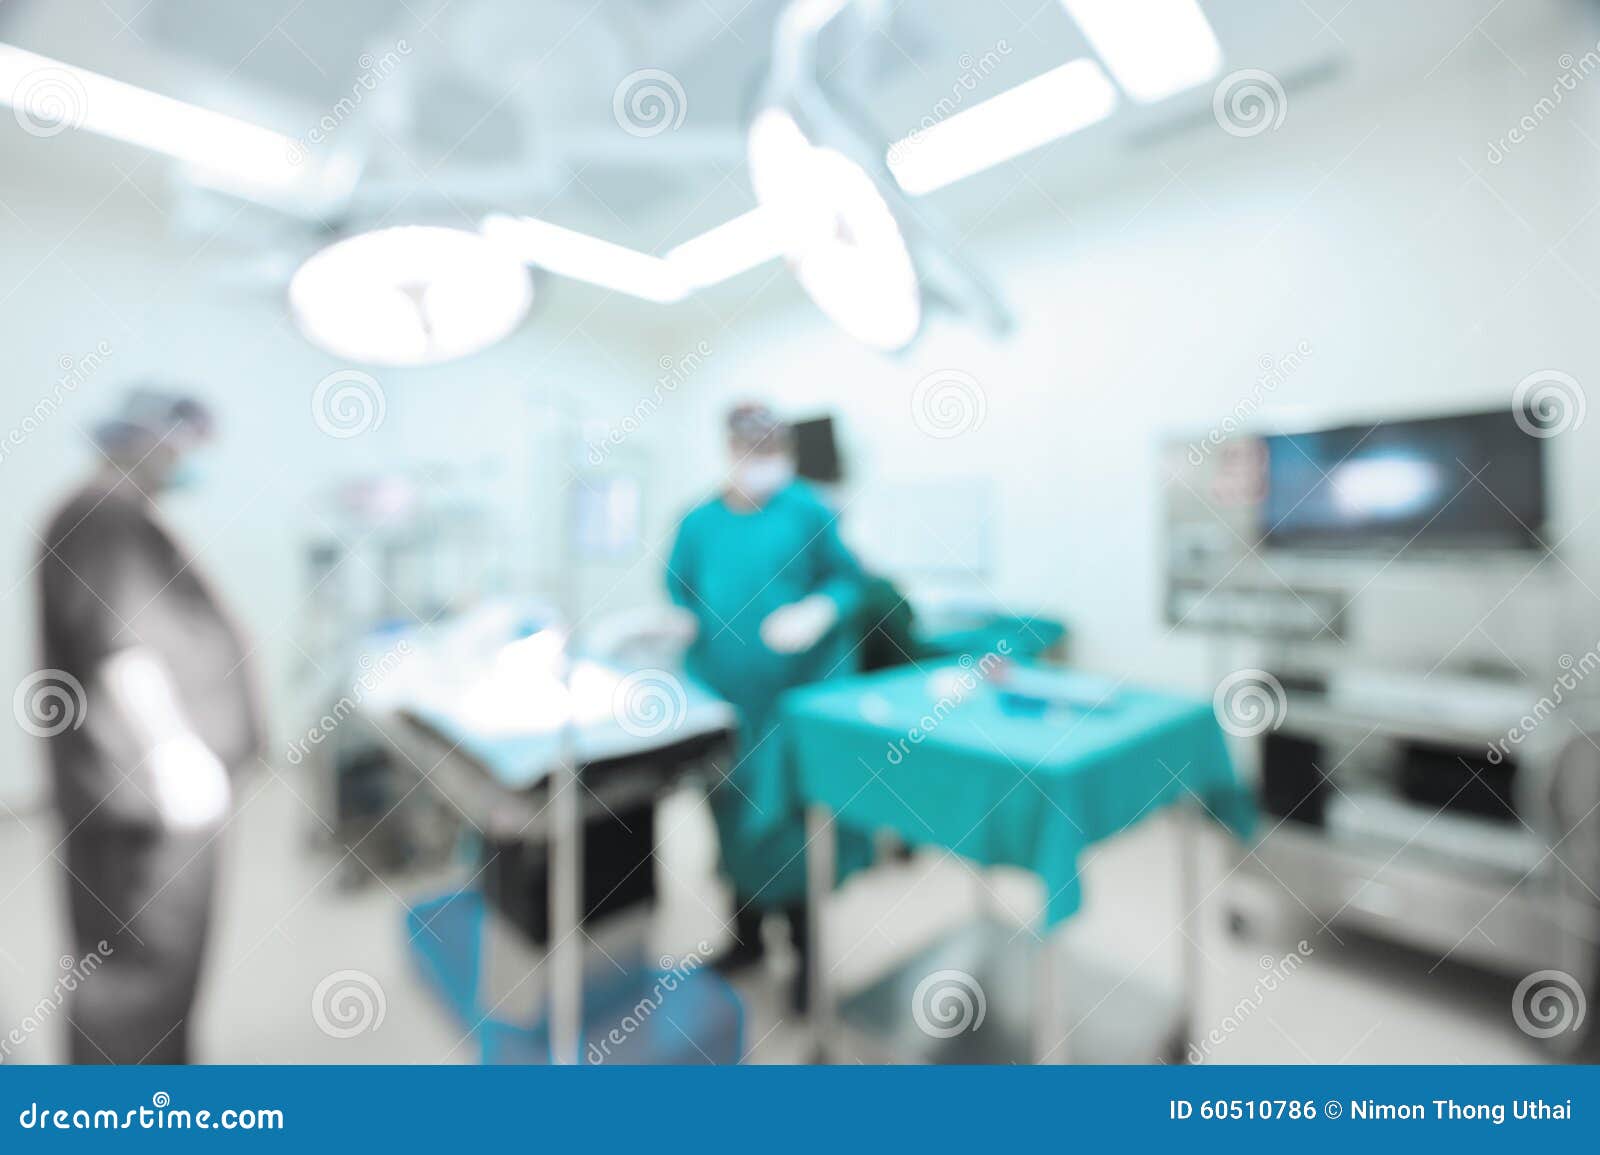 blur of two veterinarian surgeons in operating room